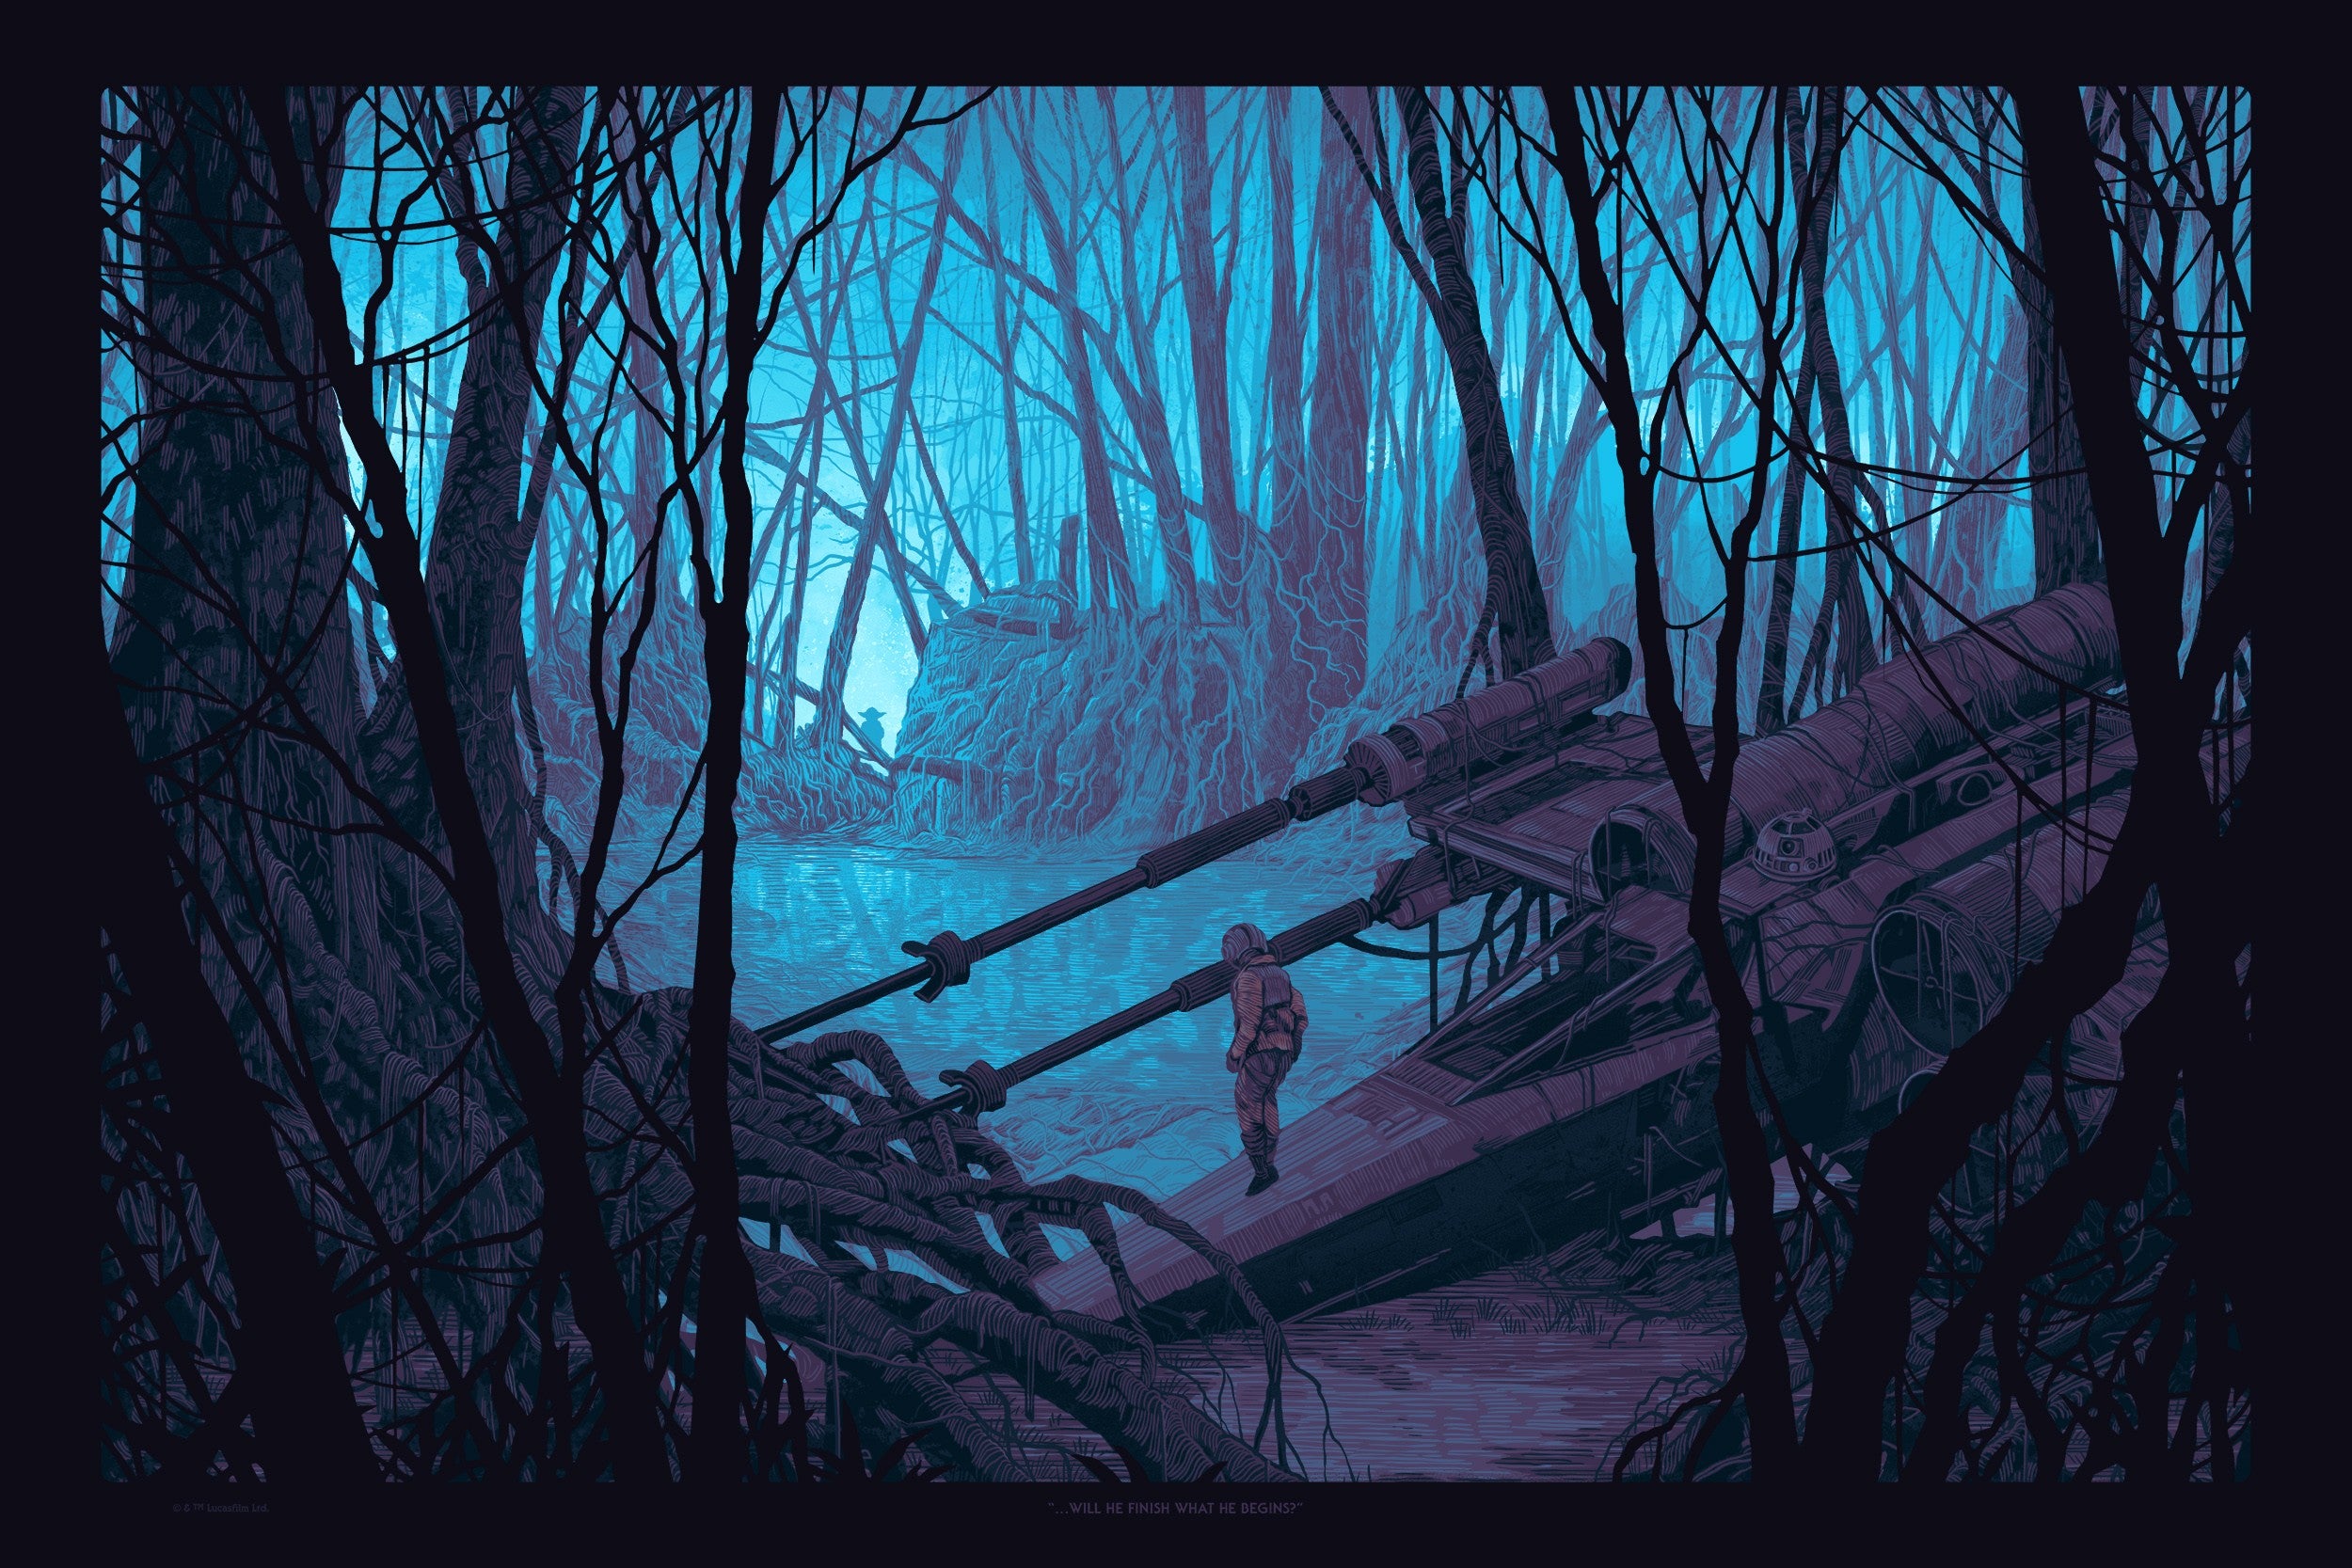 Dagobah Comes to Life in This Unique Star Wars Art Piece